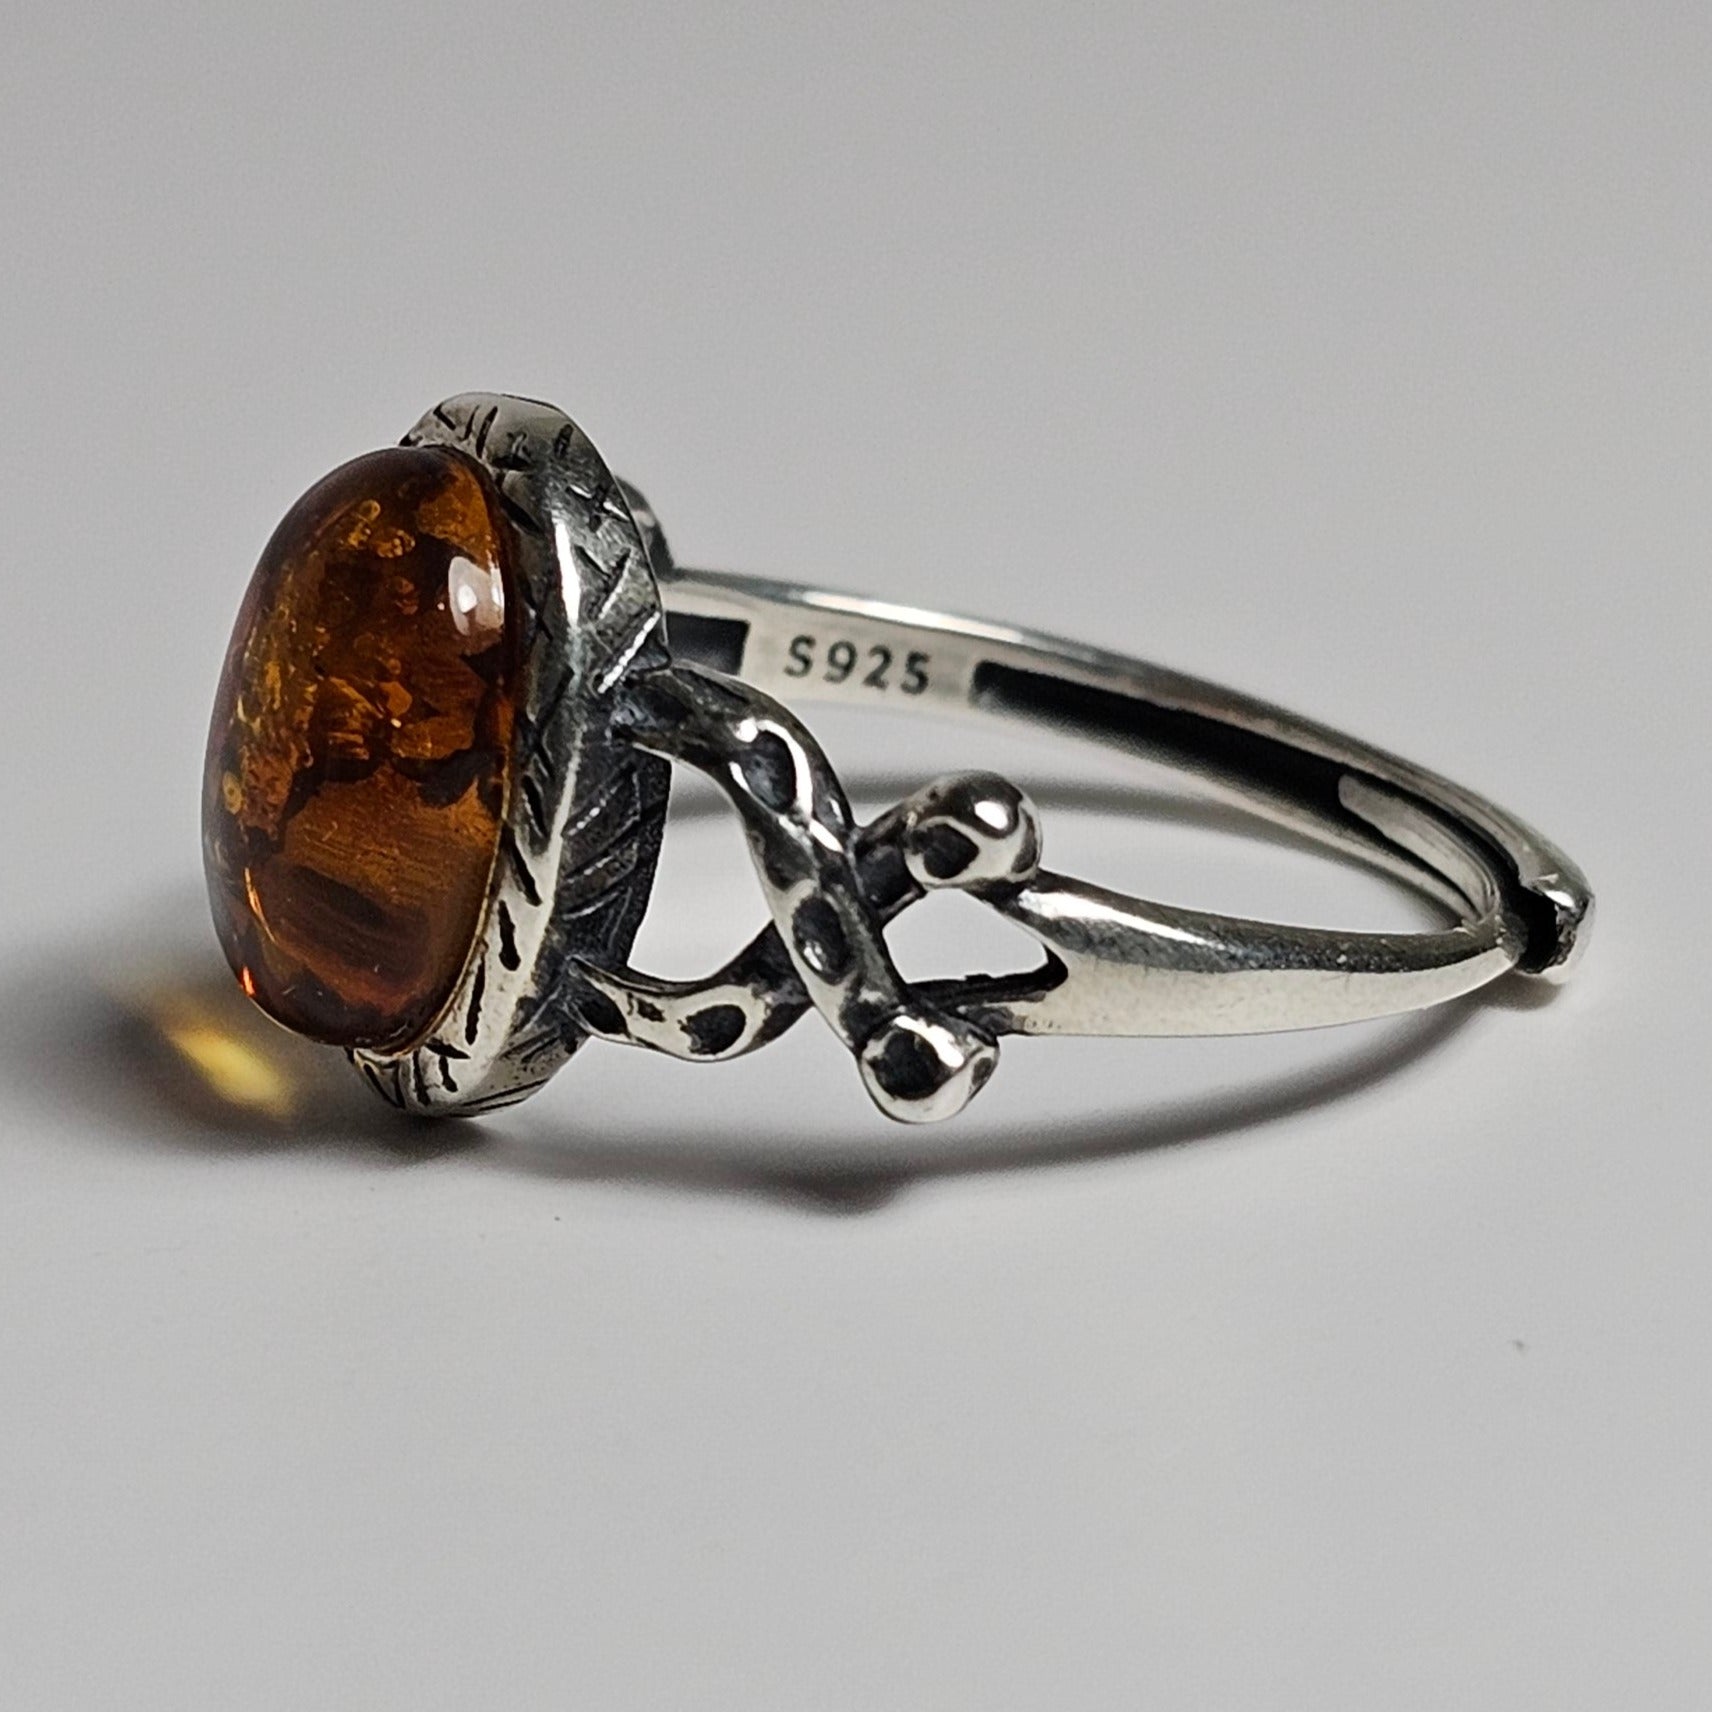 This adjustable ring is crafted from sterling silver and features a beautiful oval shaped Amber stone with a textured bezel and criss-cross designed shoulders.